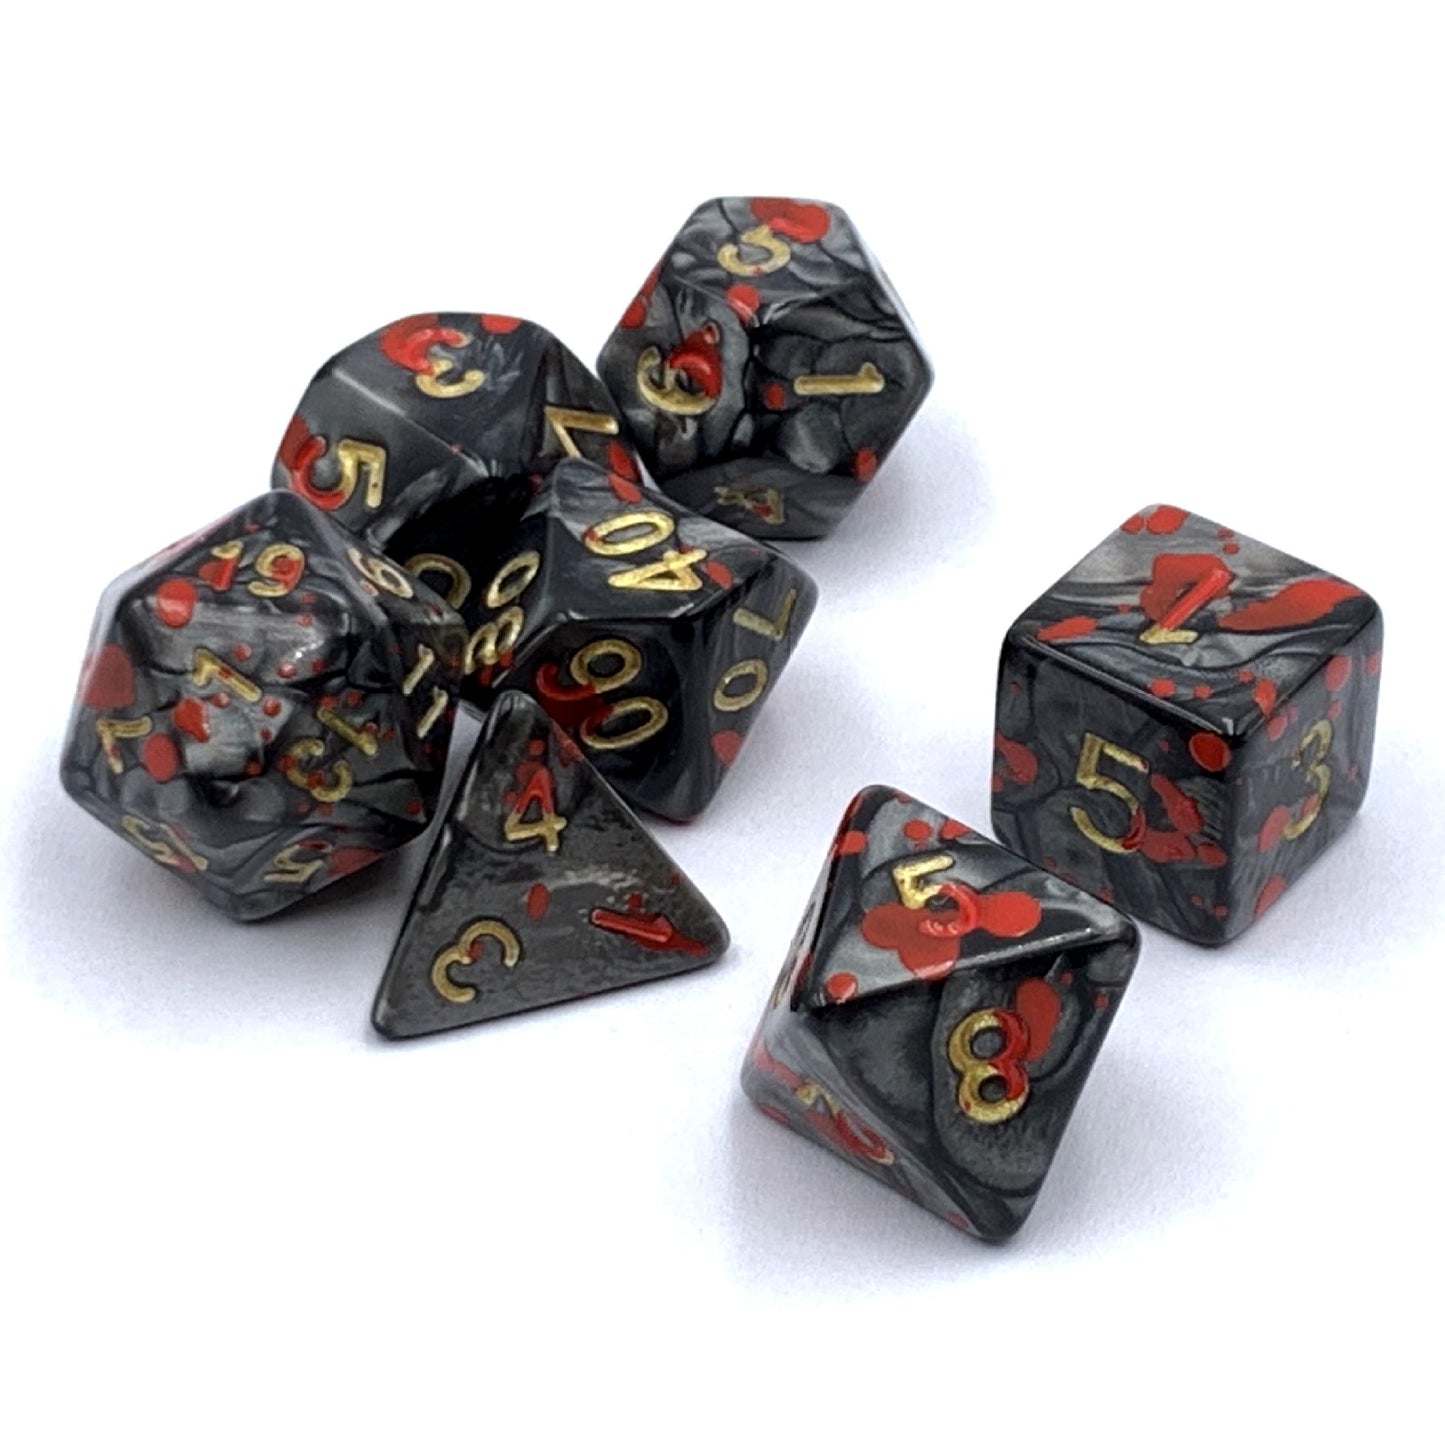 FREE Today: Pearl Blood Stain DND Dice Set